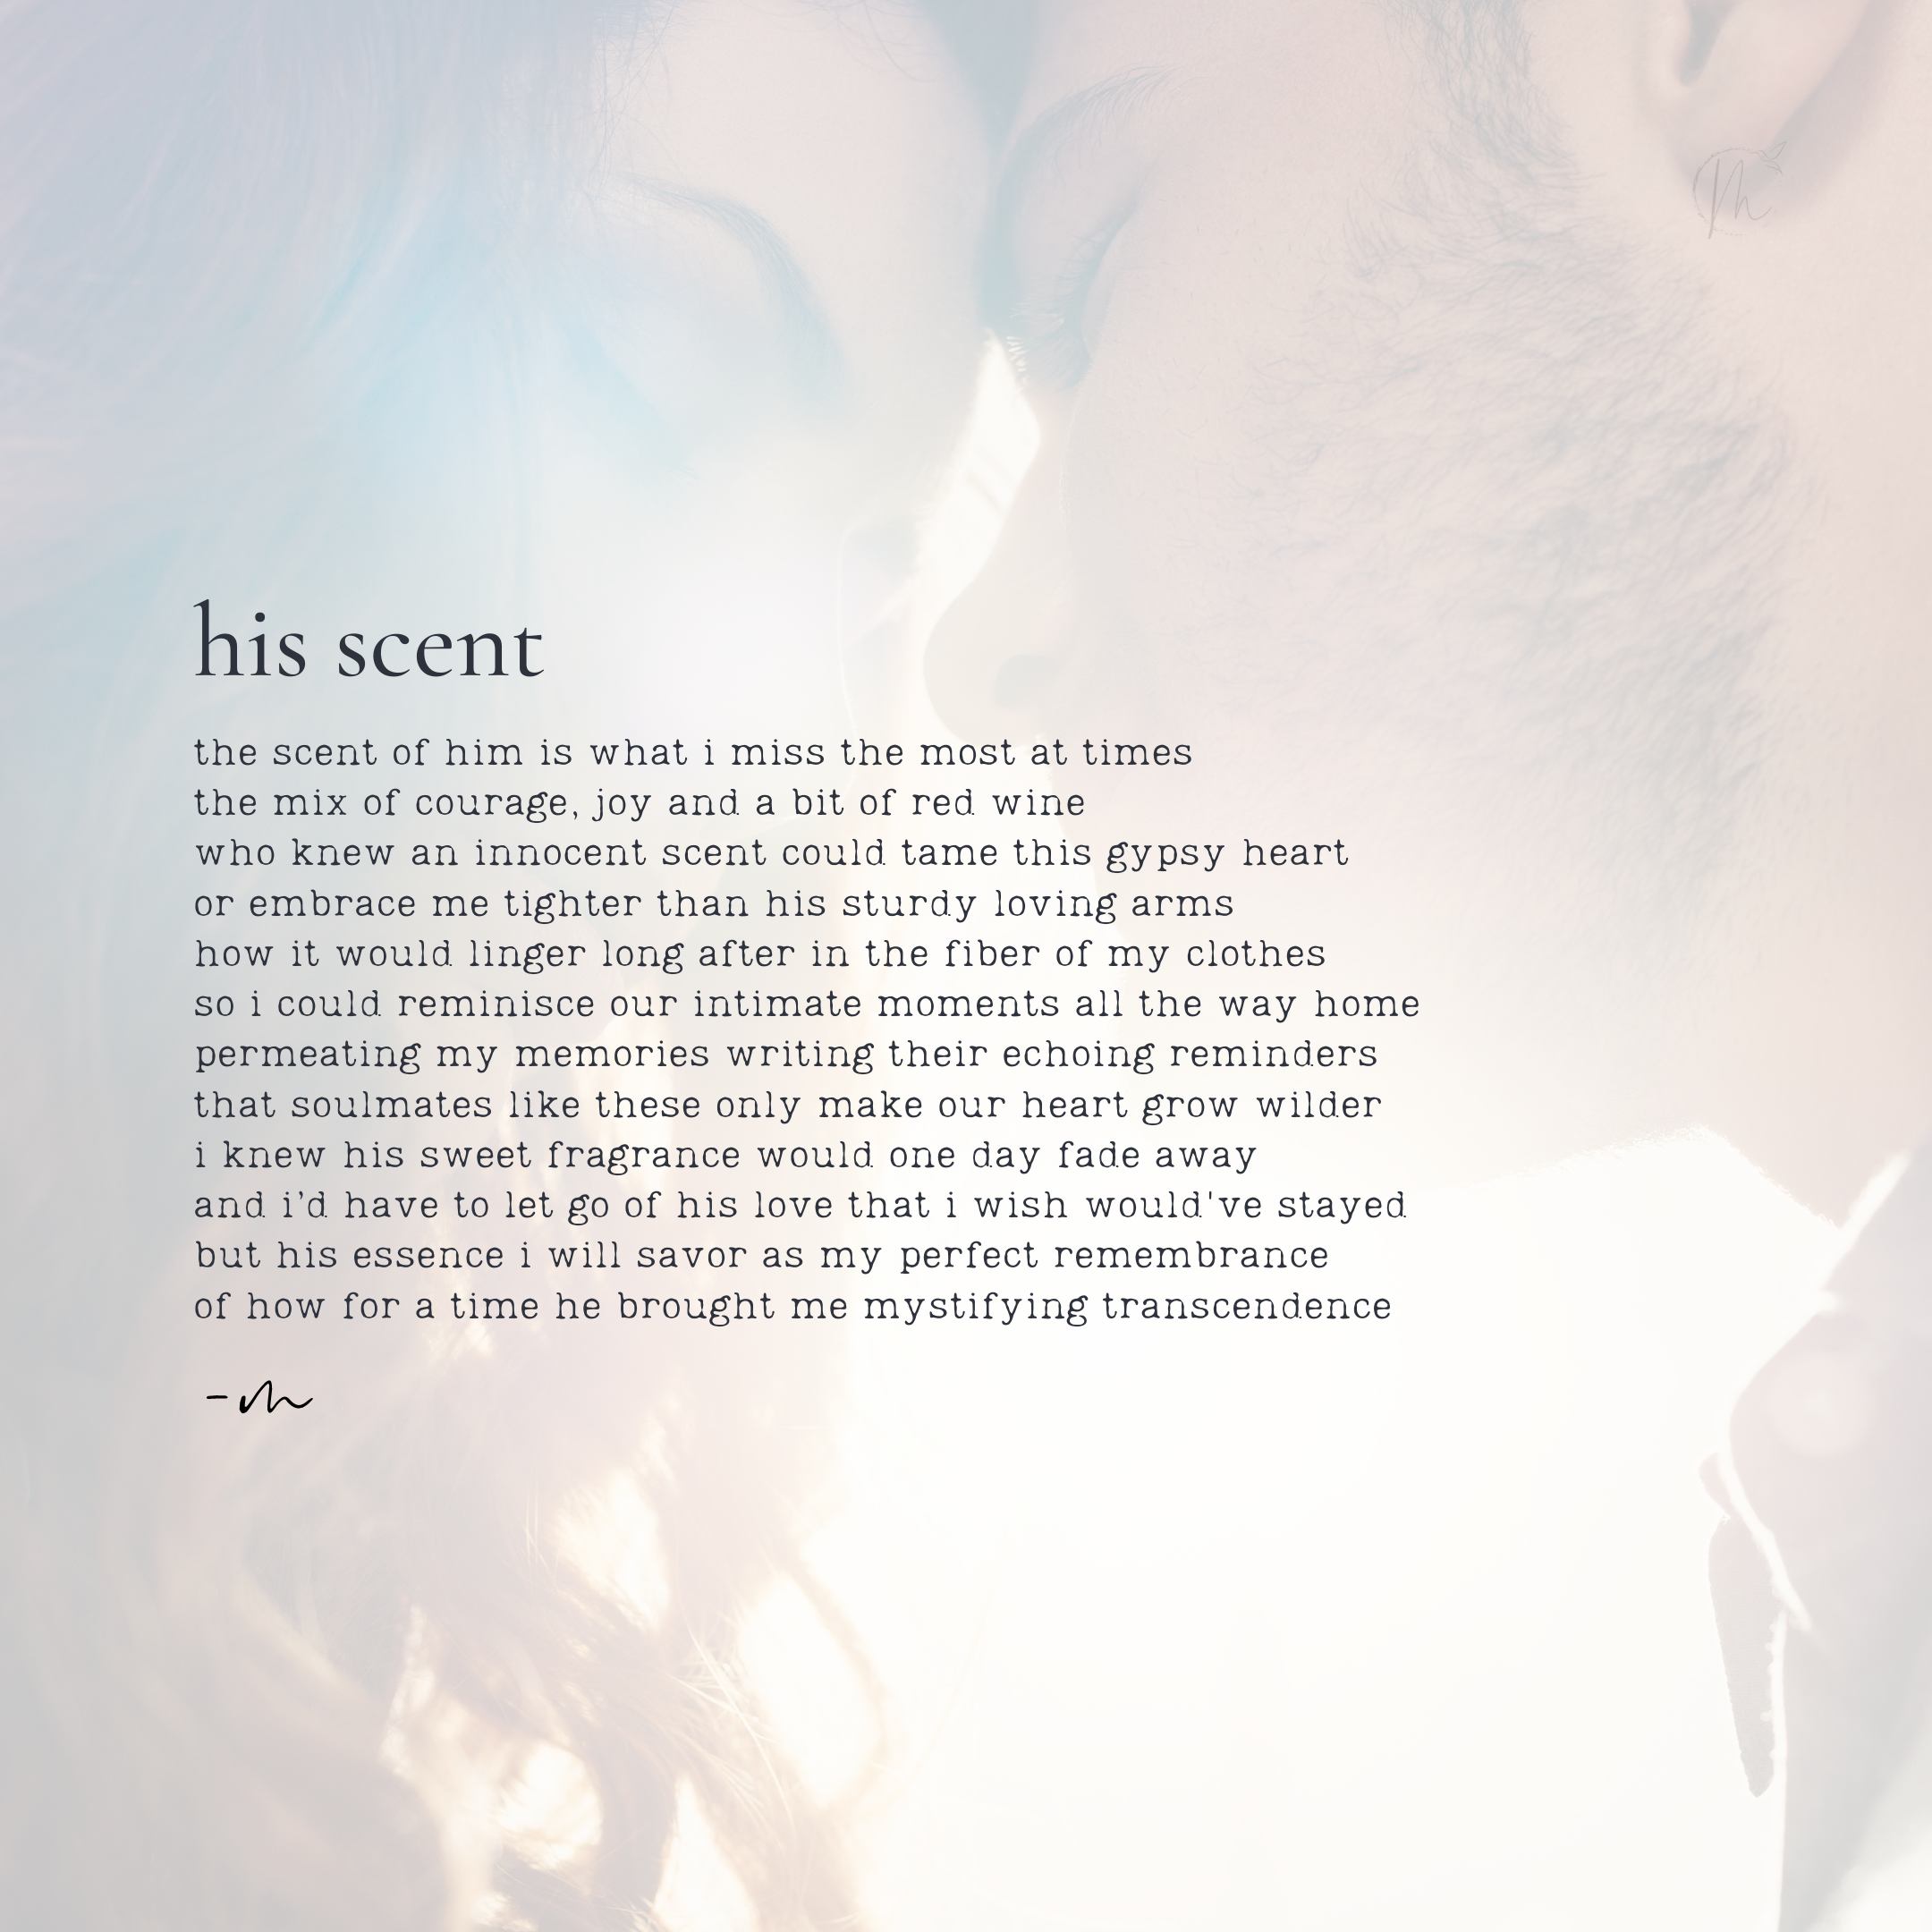 poem - his scent with photo.png